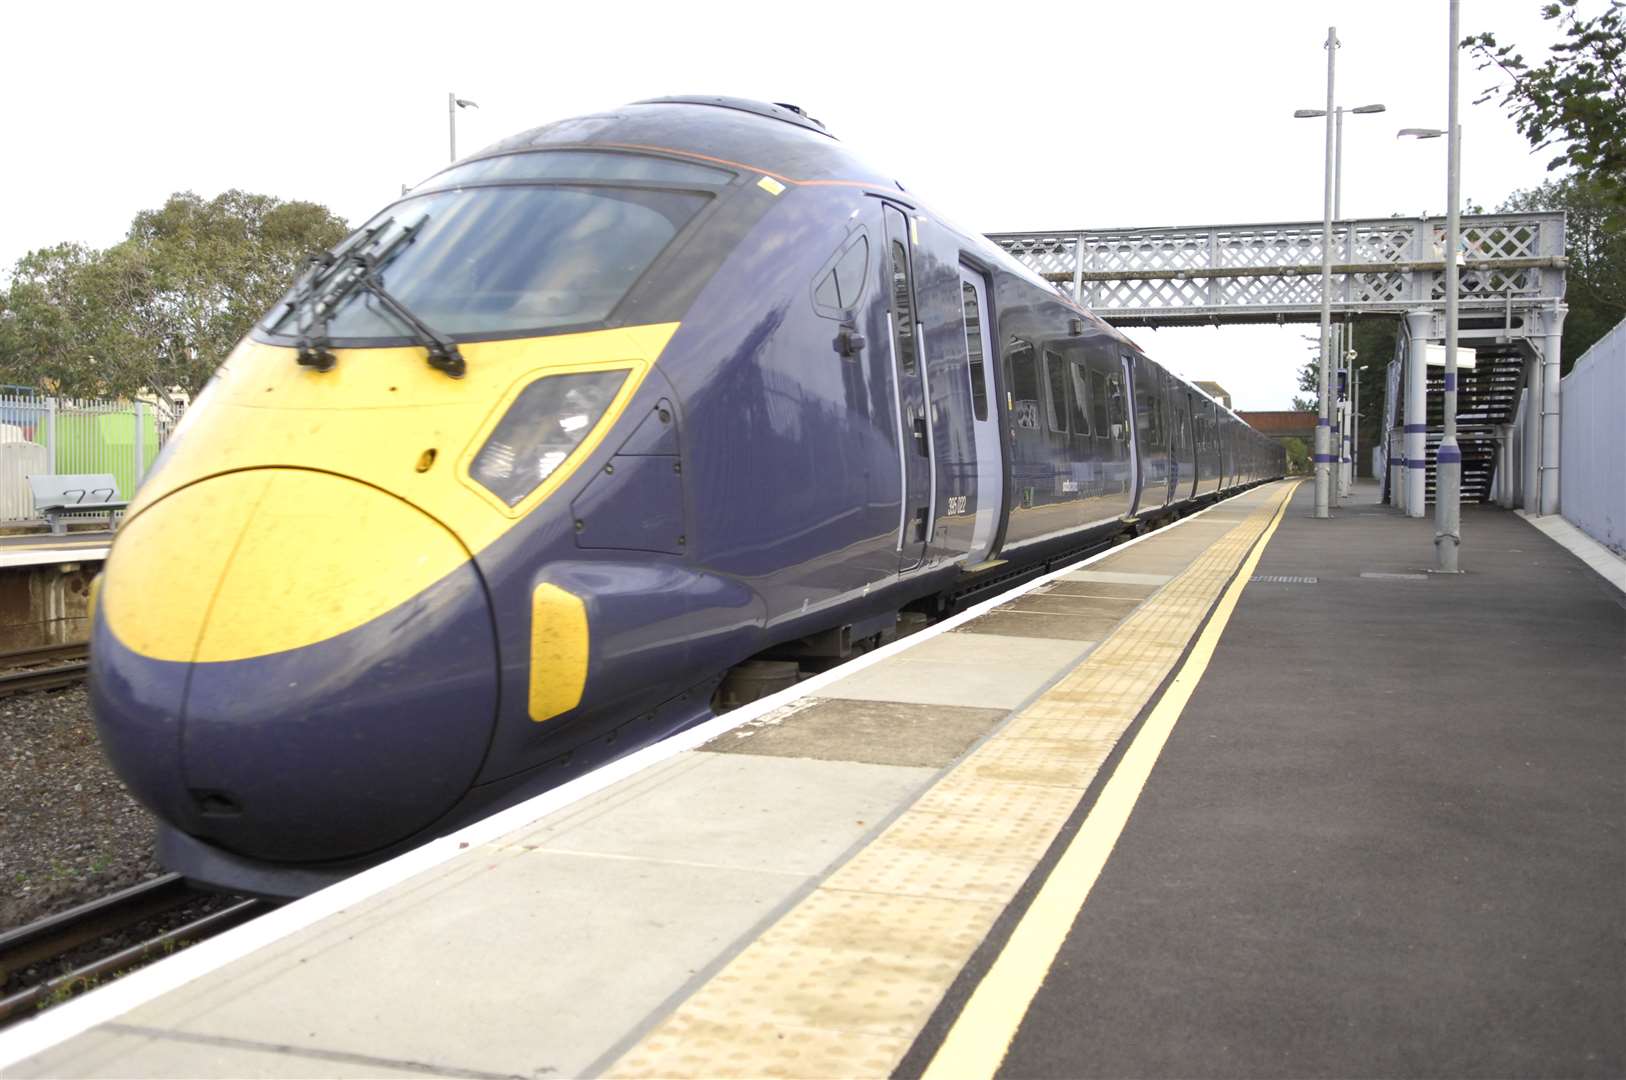 The first High Speed train stopping at Deal in September 2011.Picture: Martin Apps